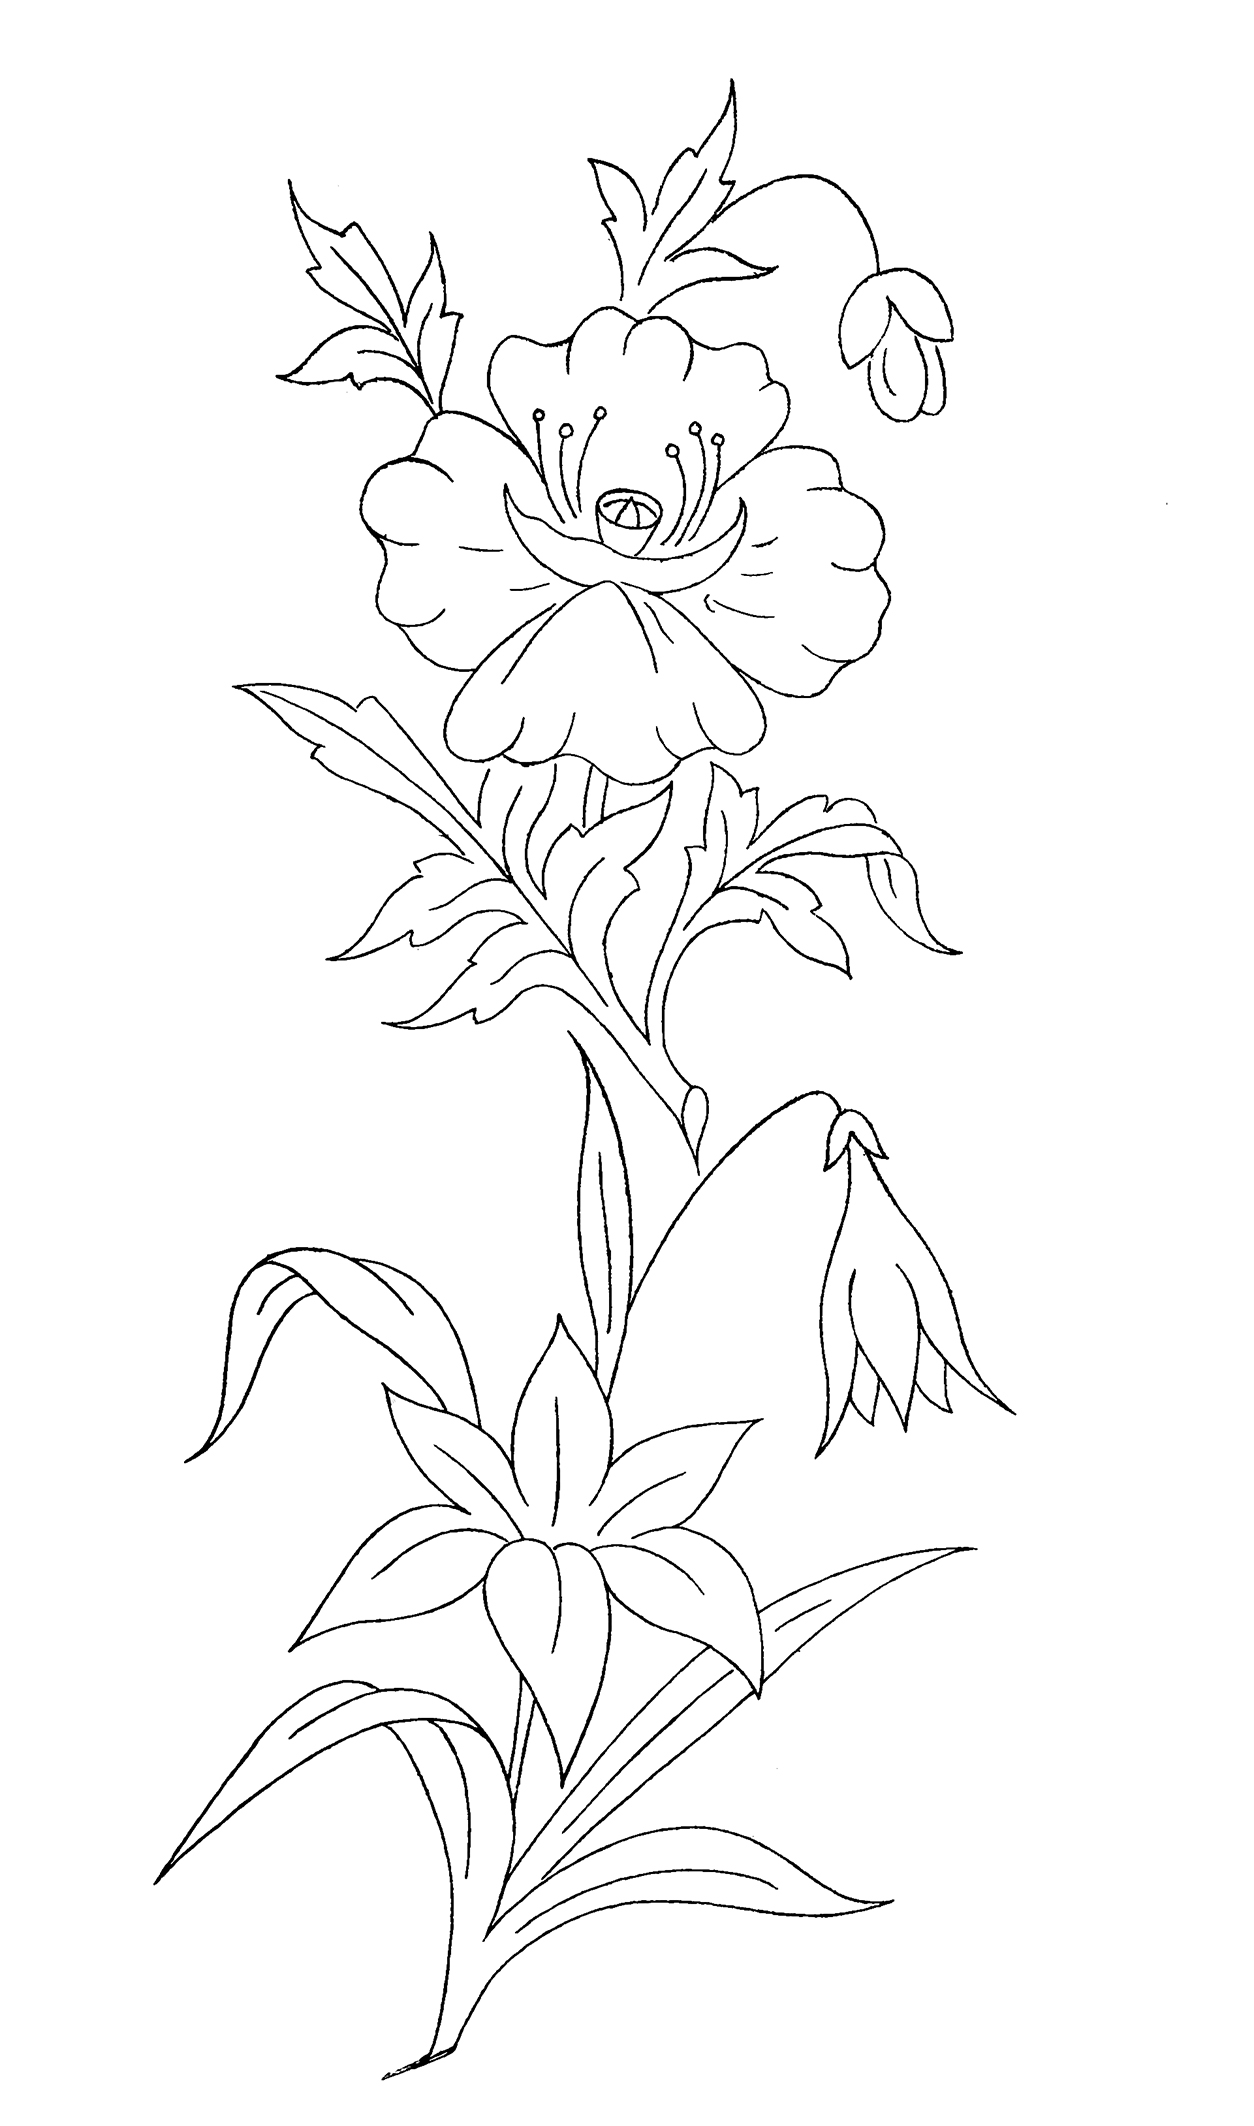 coloring sheet with different flowers